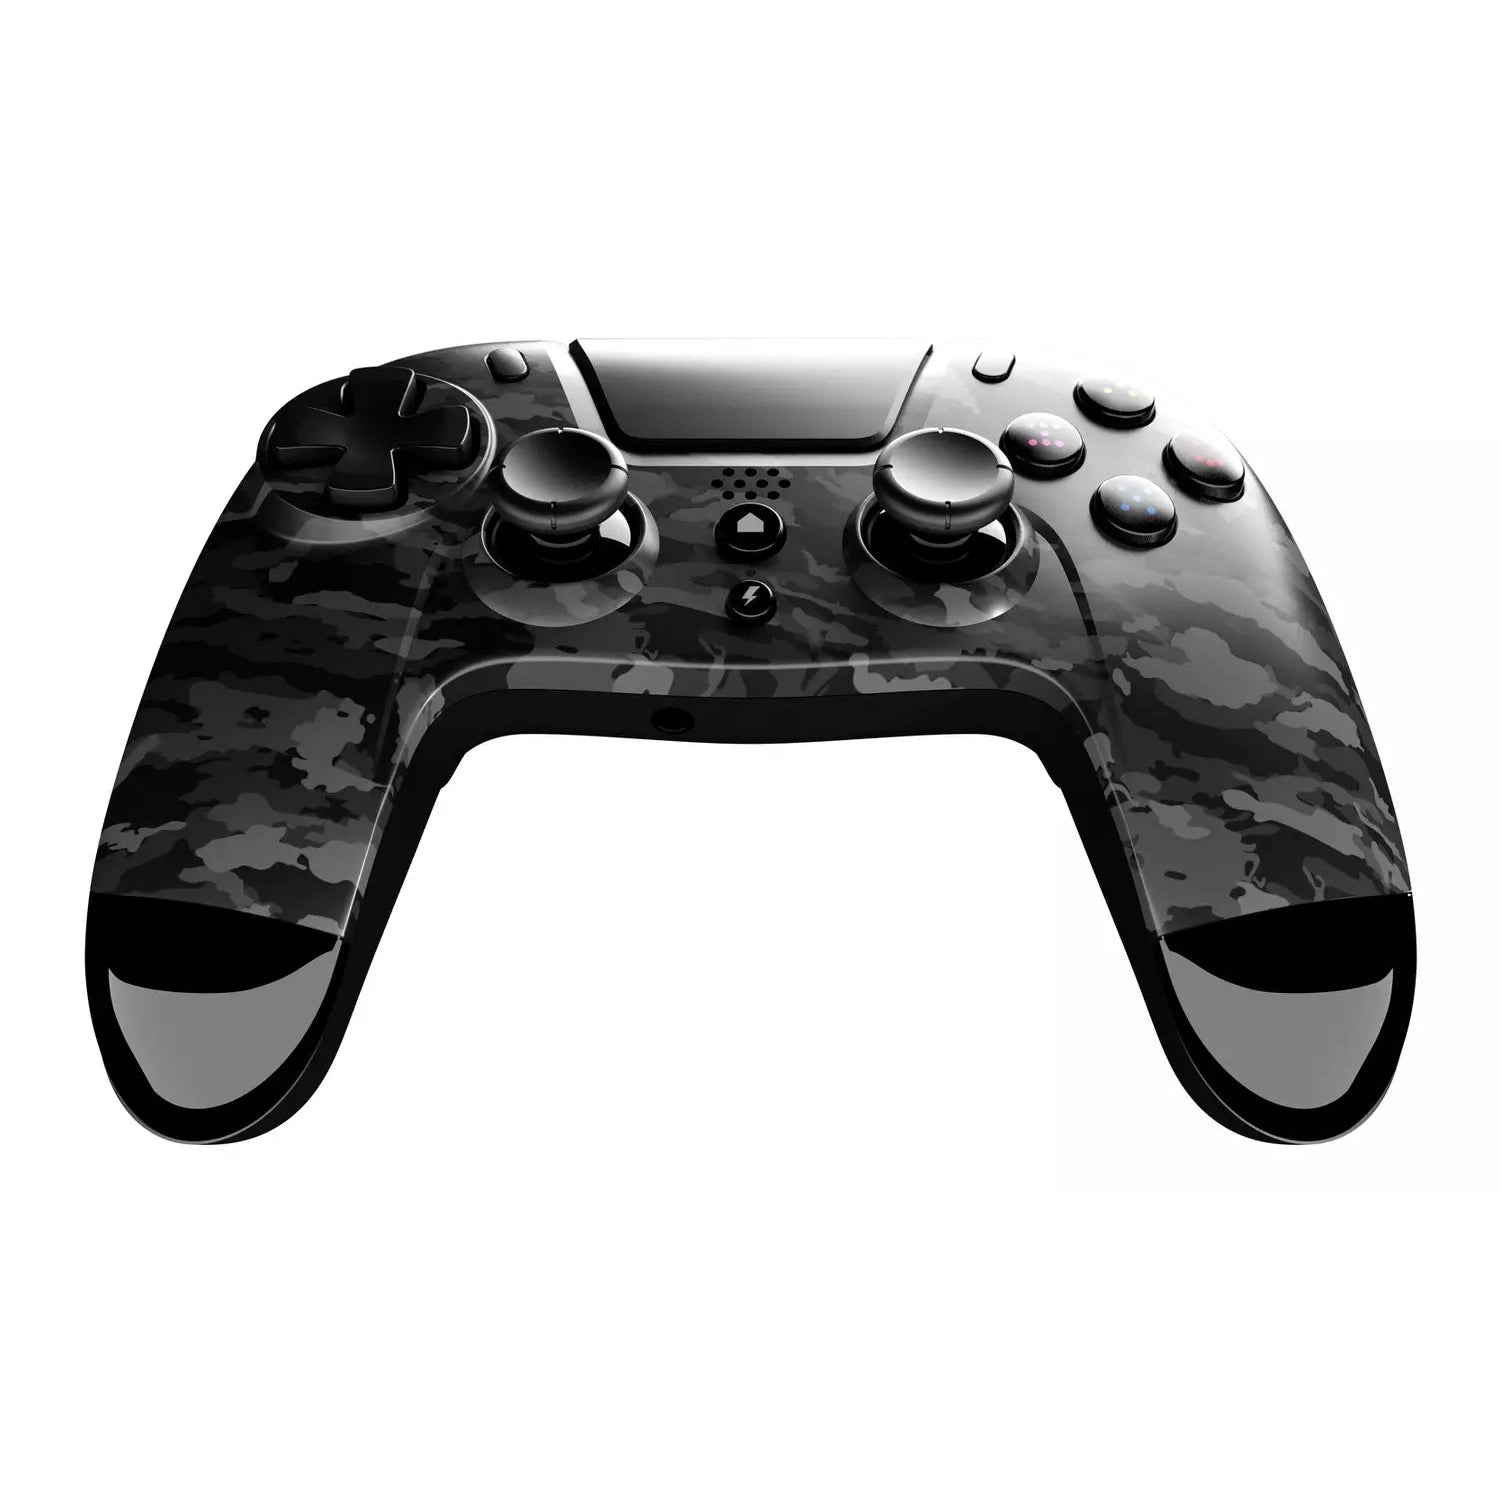 Gioteck VX-4 Wireless Controller for PS4 - Dark Camo - Refurbished Good